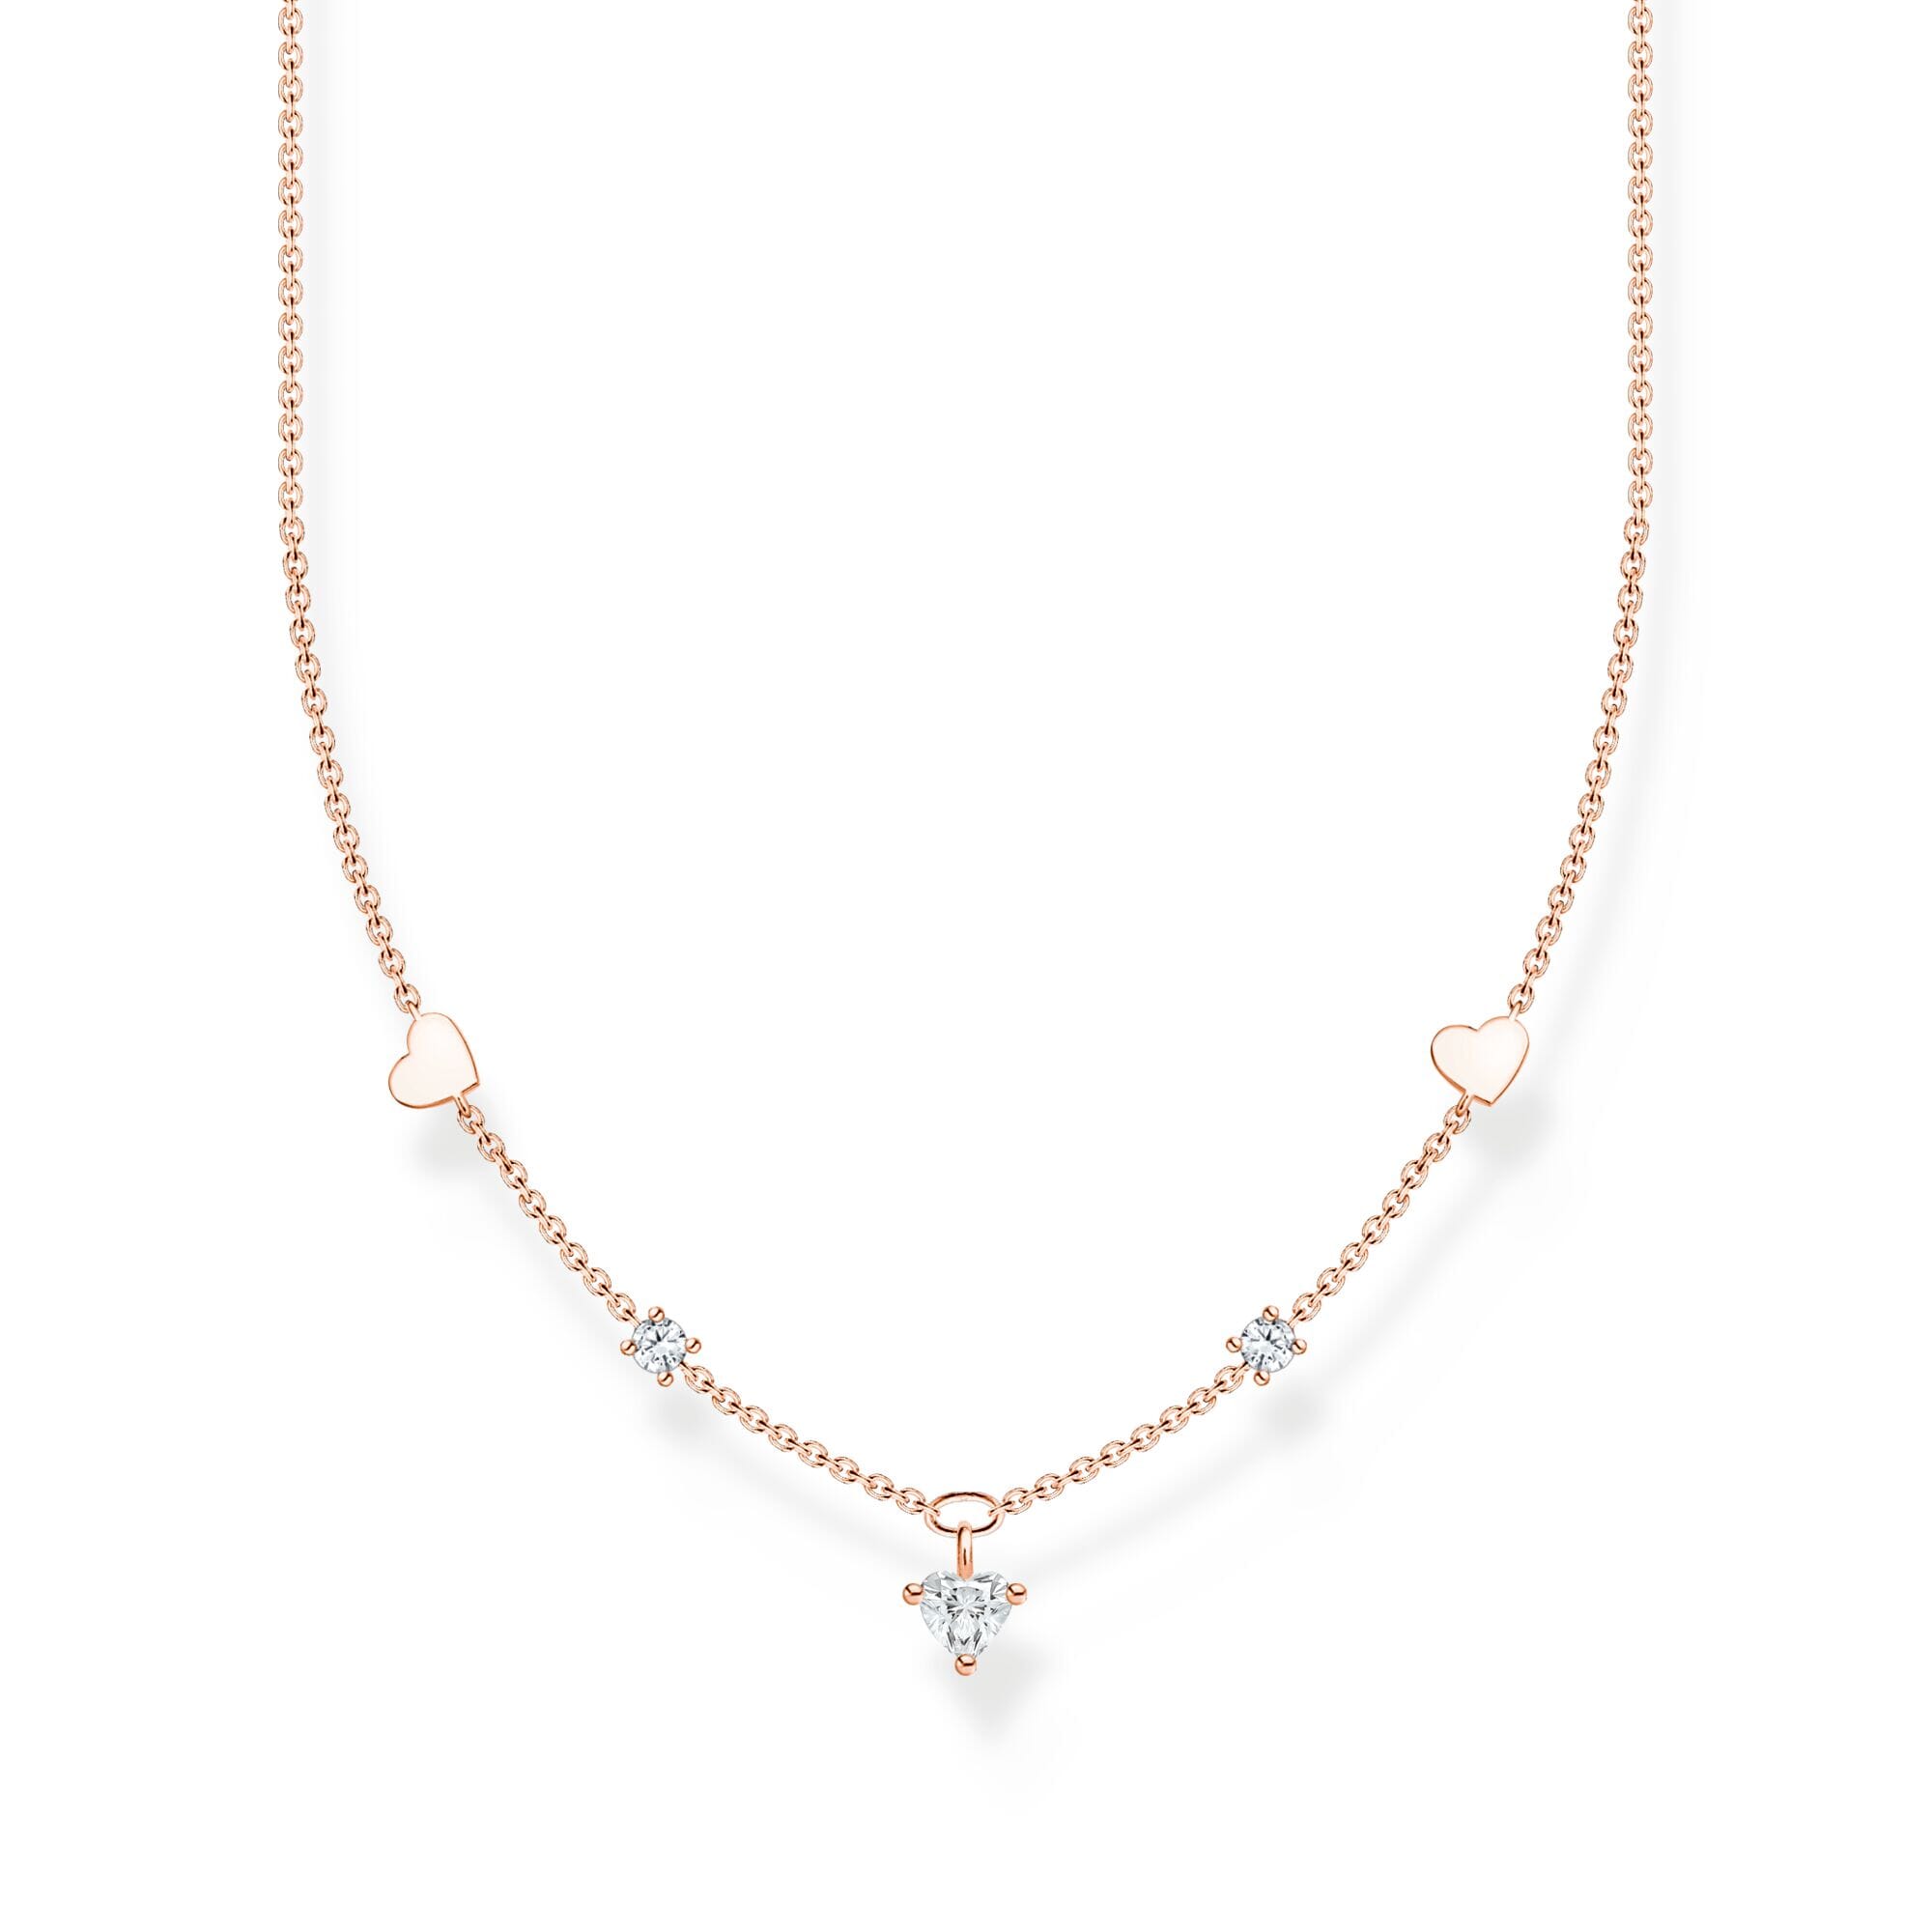 Thomas Sabo Necklace with hearts and white stones rose gold Necklaces Thomas Sabo 